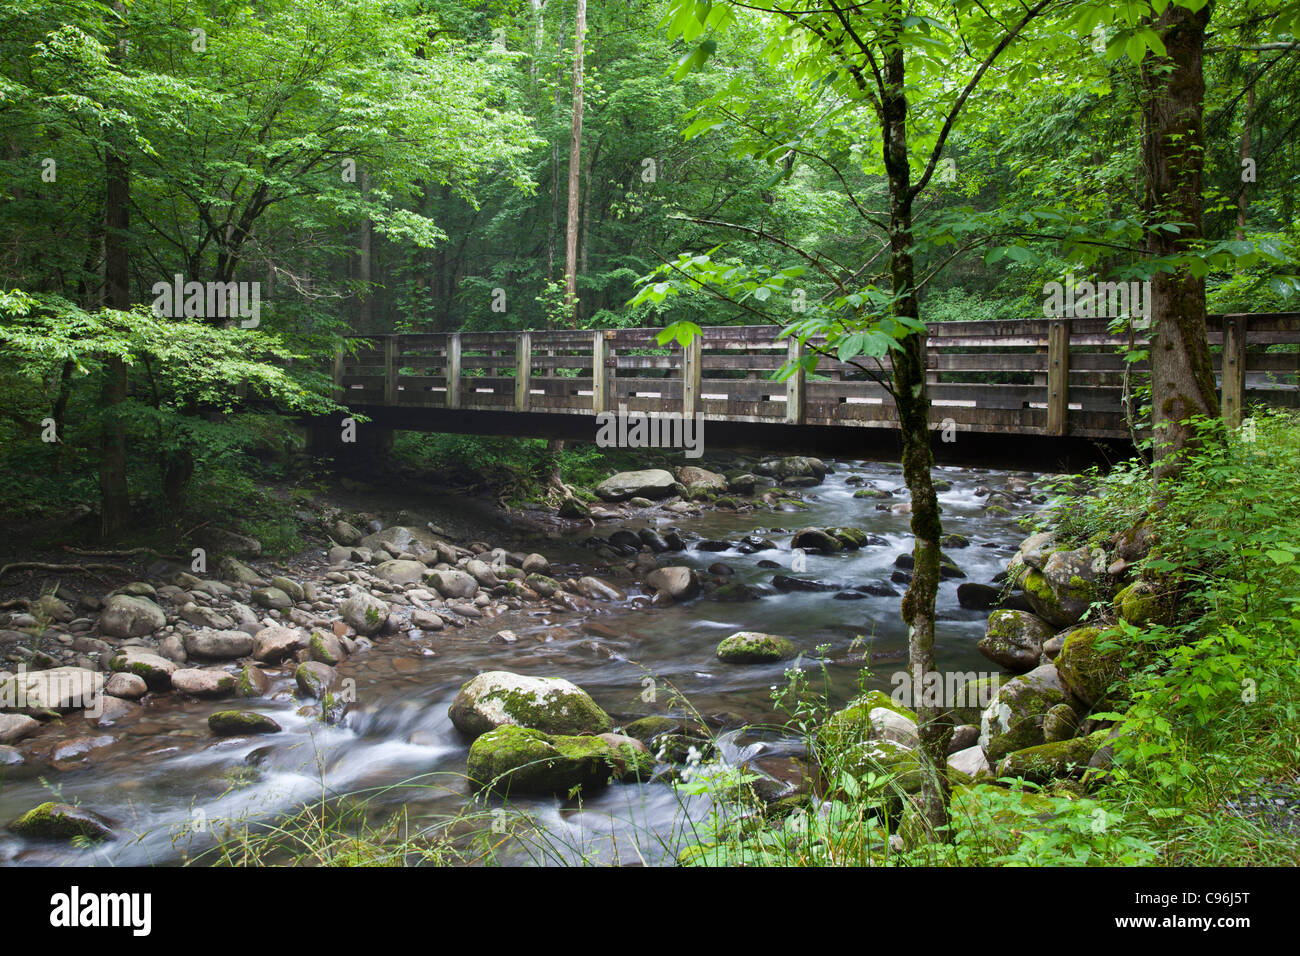 Bridge over the Middle Prong of the Little Pigeon River in the Great Smoky Mountains National Park, on the Tennessee side of the park. Stock Photo